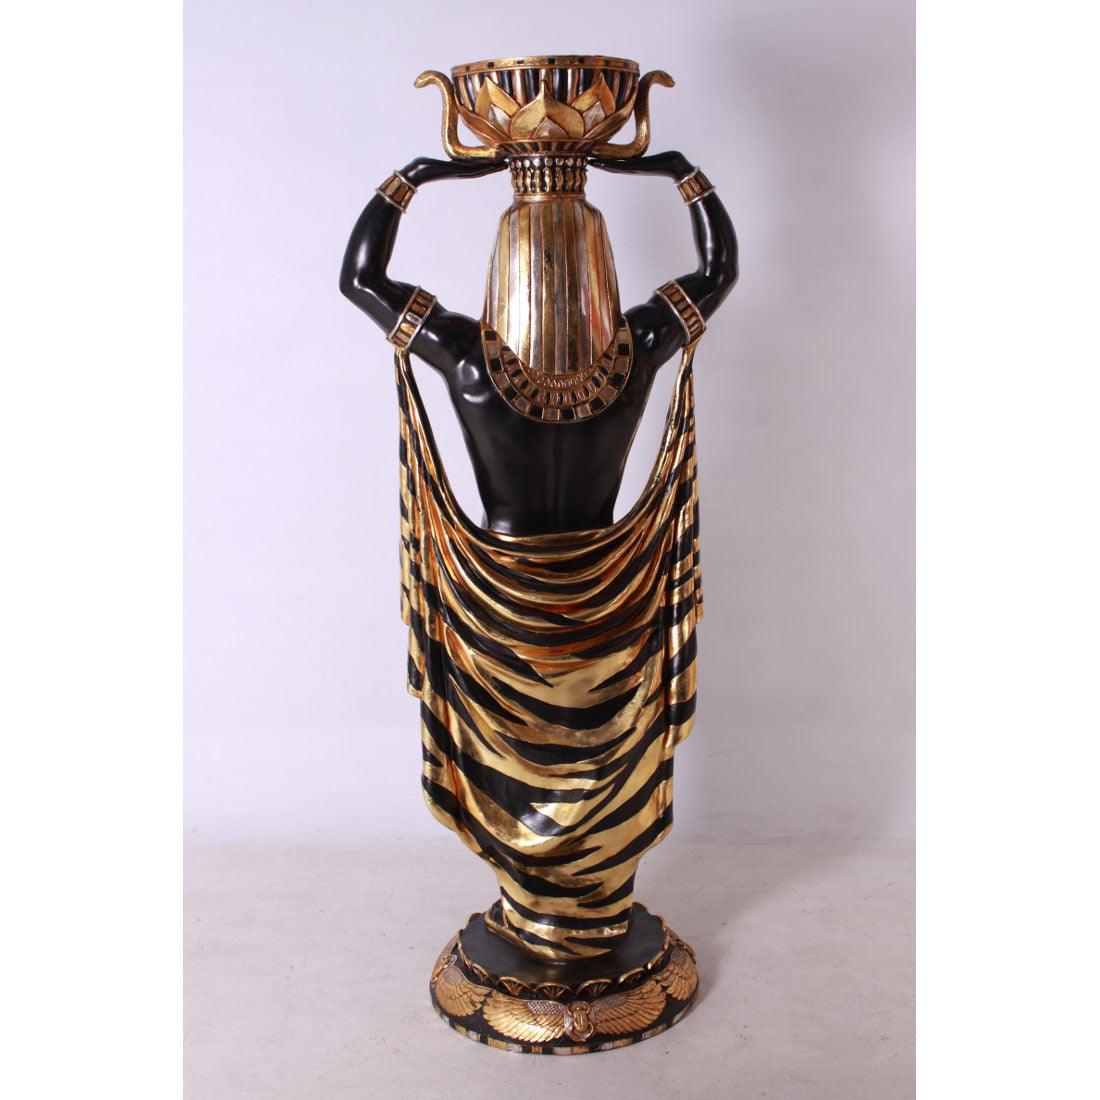 Egyptian Plant Holder Male Life Size Statue - LM Treasures Prop Rentals 